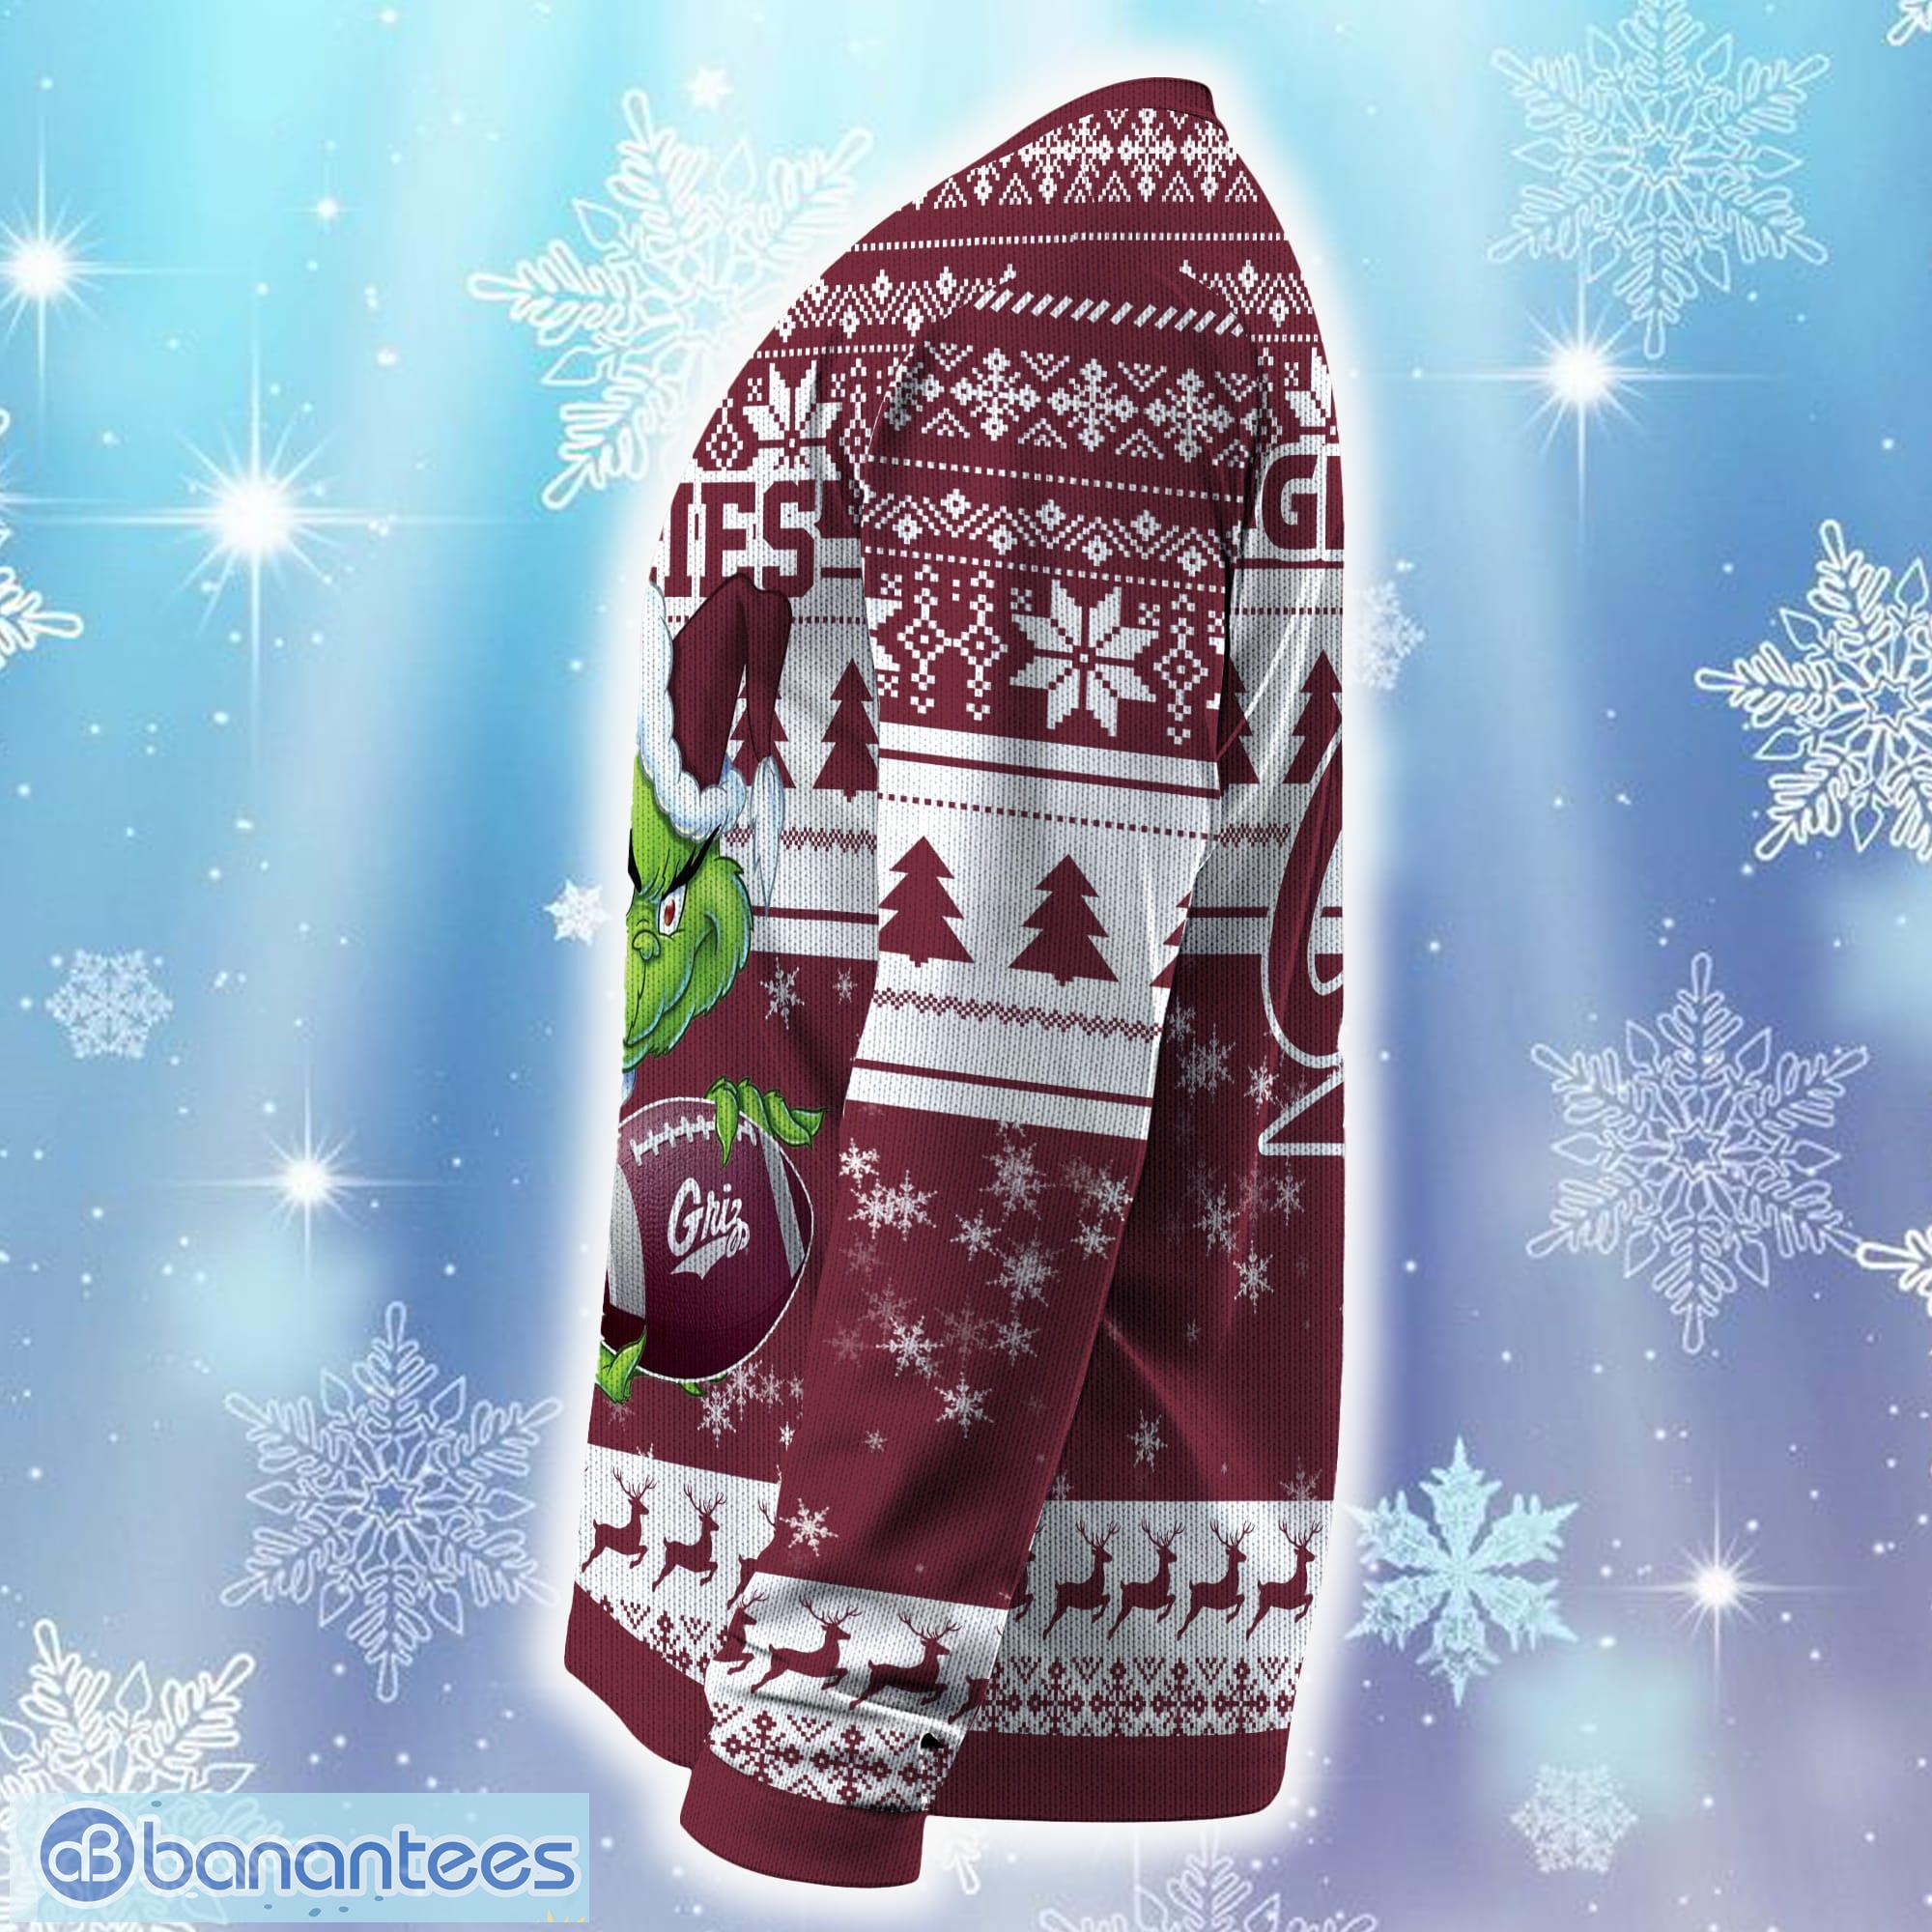 NCAA Montana Grizzlies Grinch Christmas Ugly Sweater New For Fans Gift  Holidays Christmas - Freedomdesign